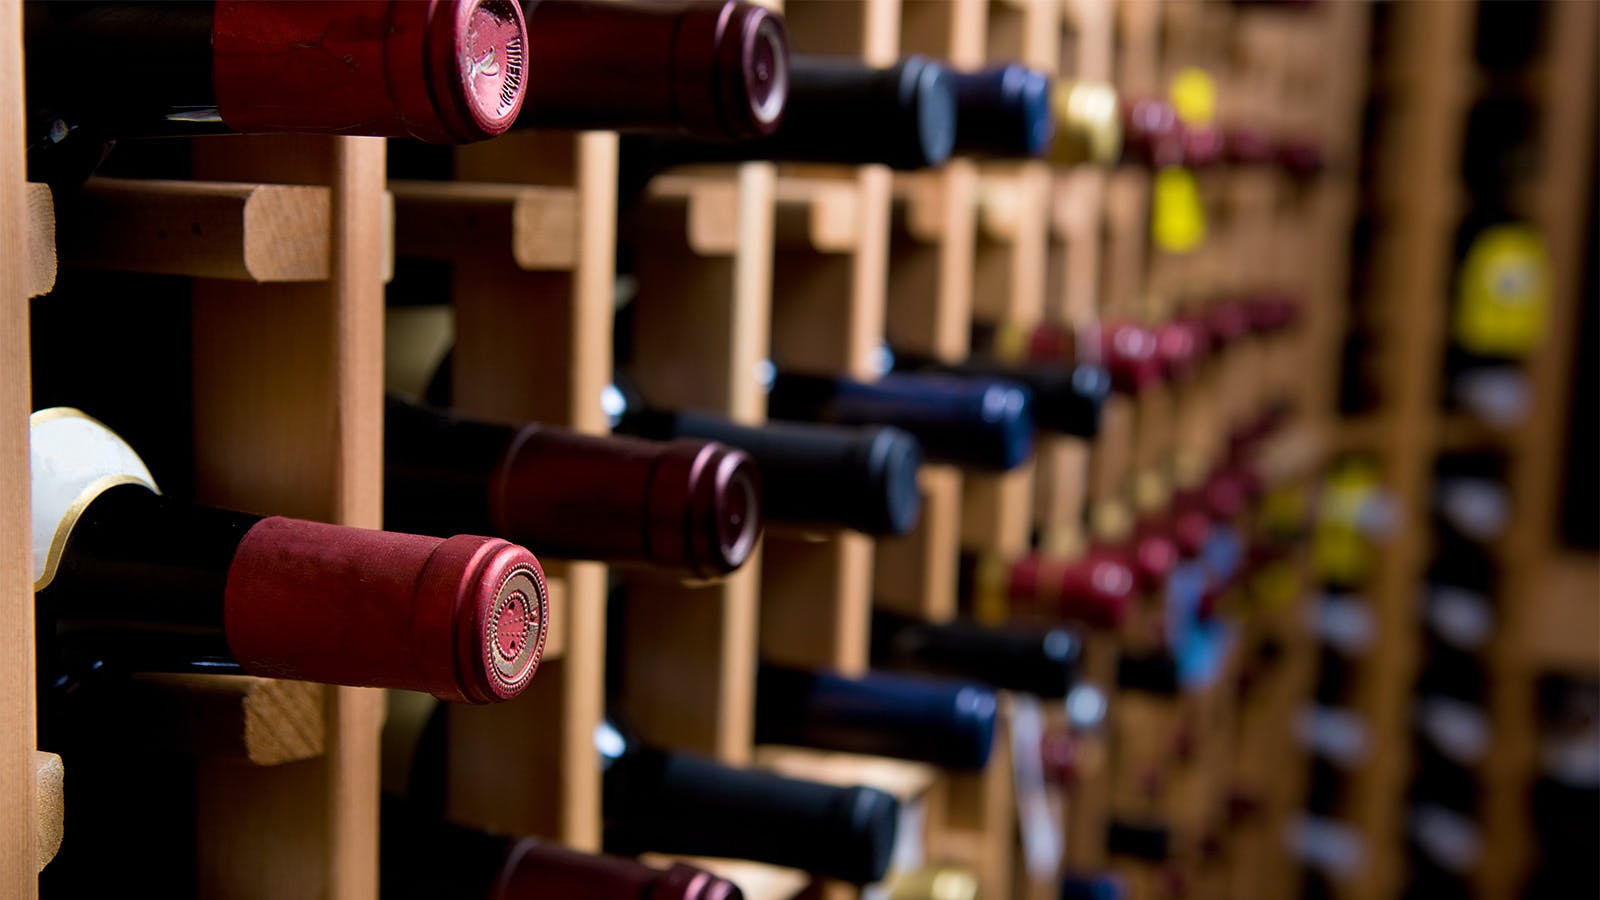 The Australian wine industry is one the world's